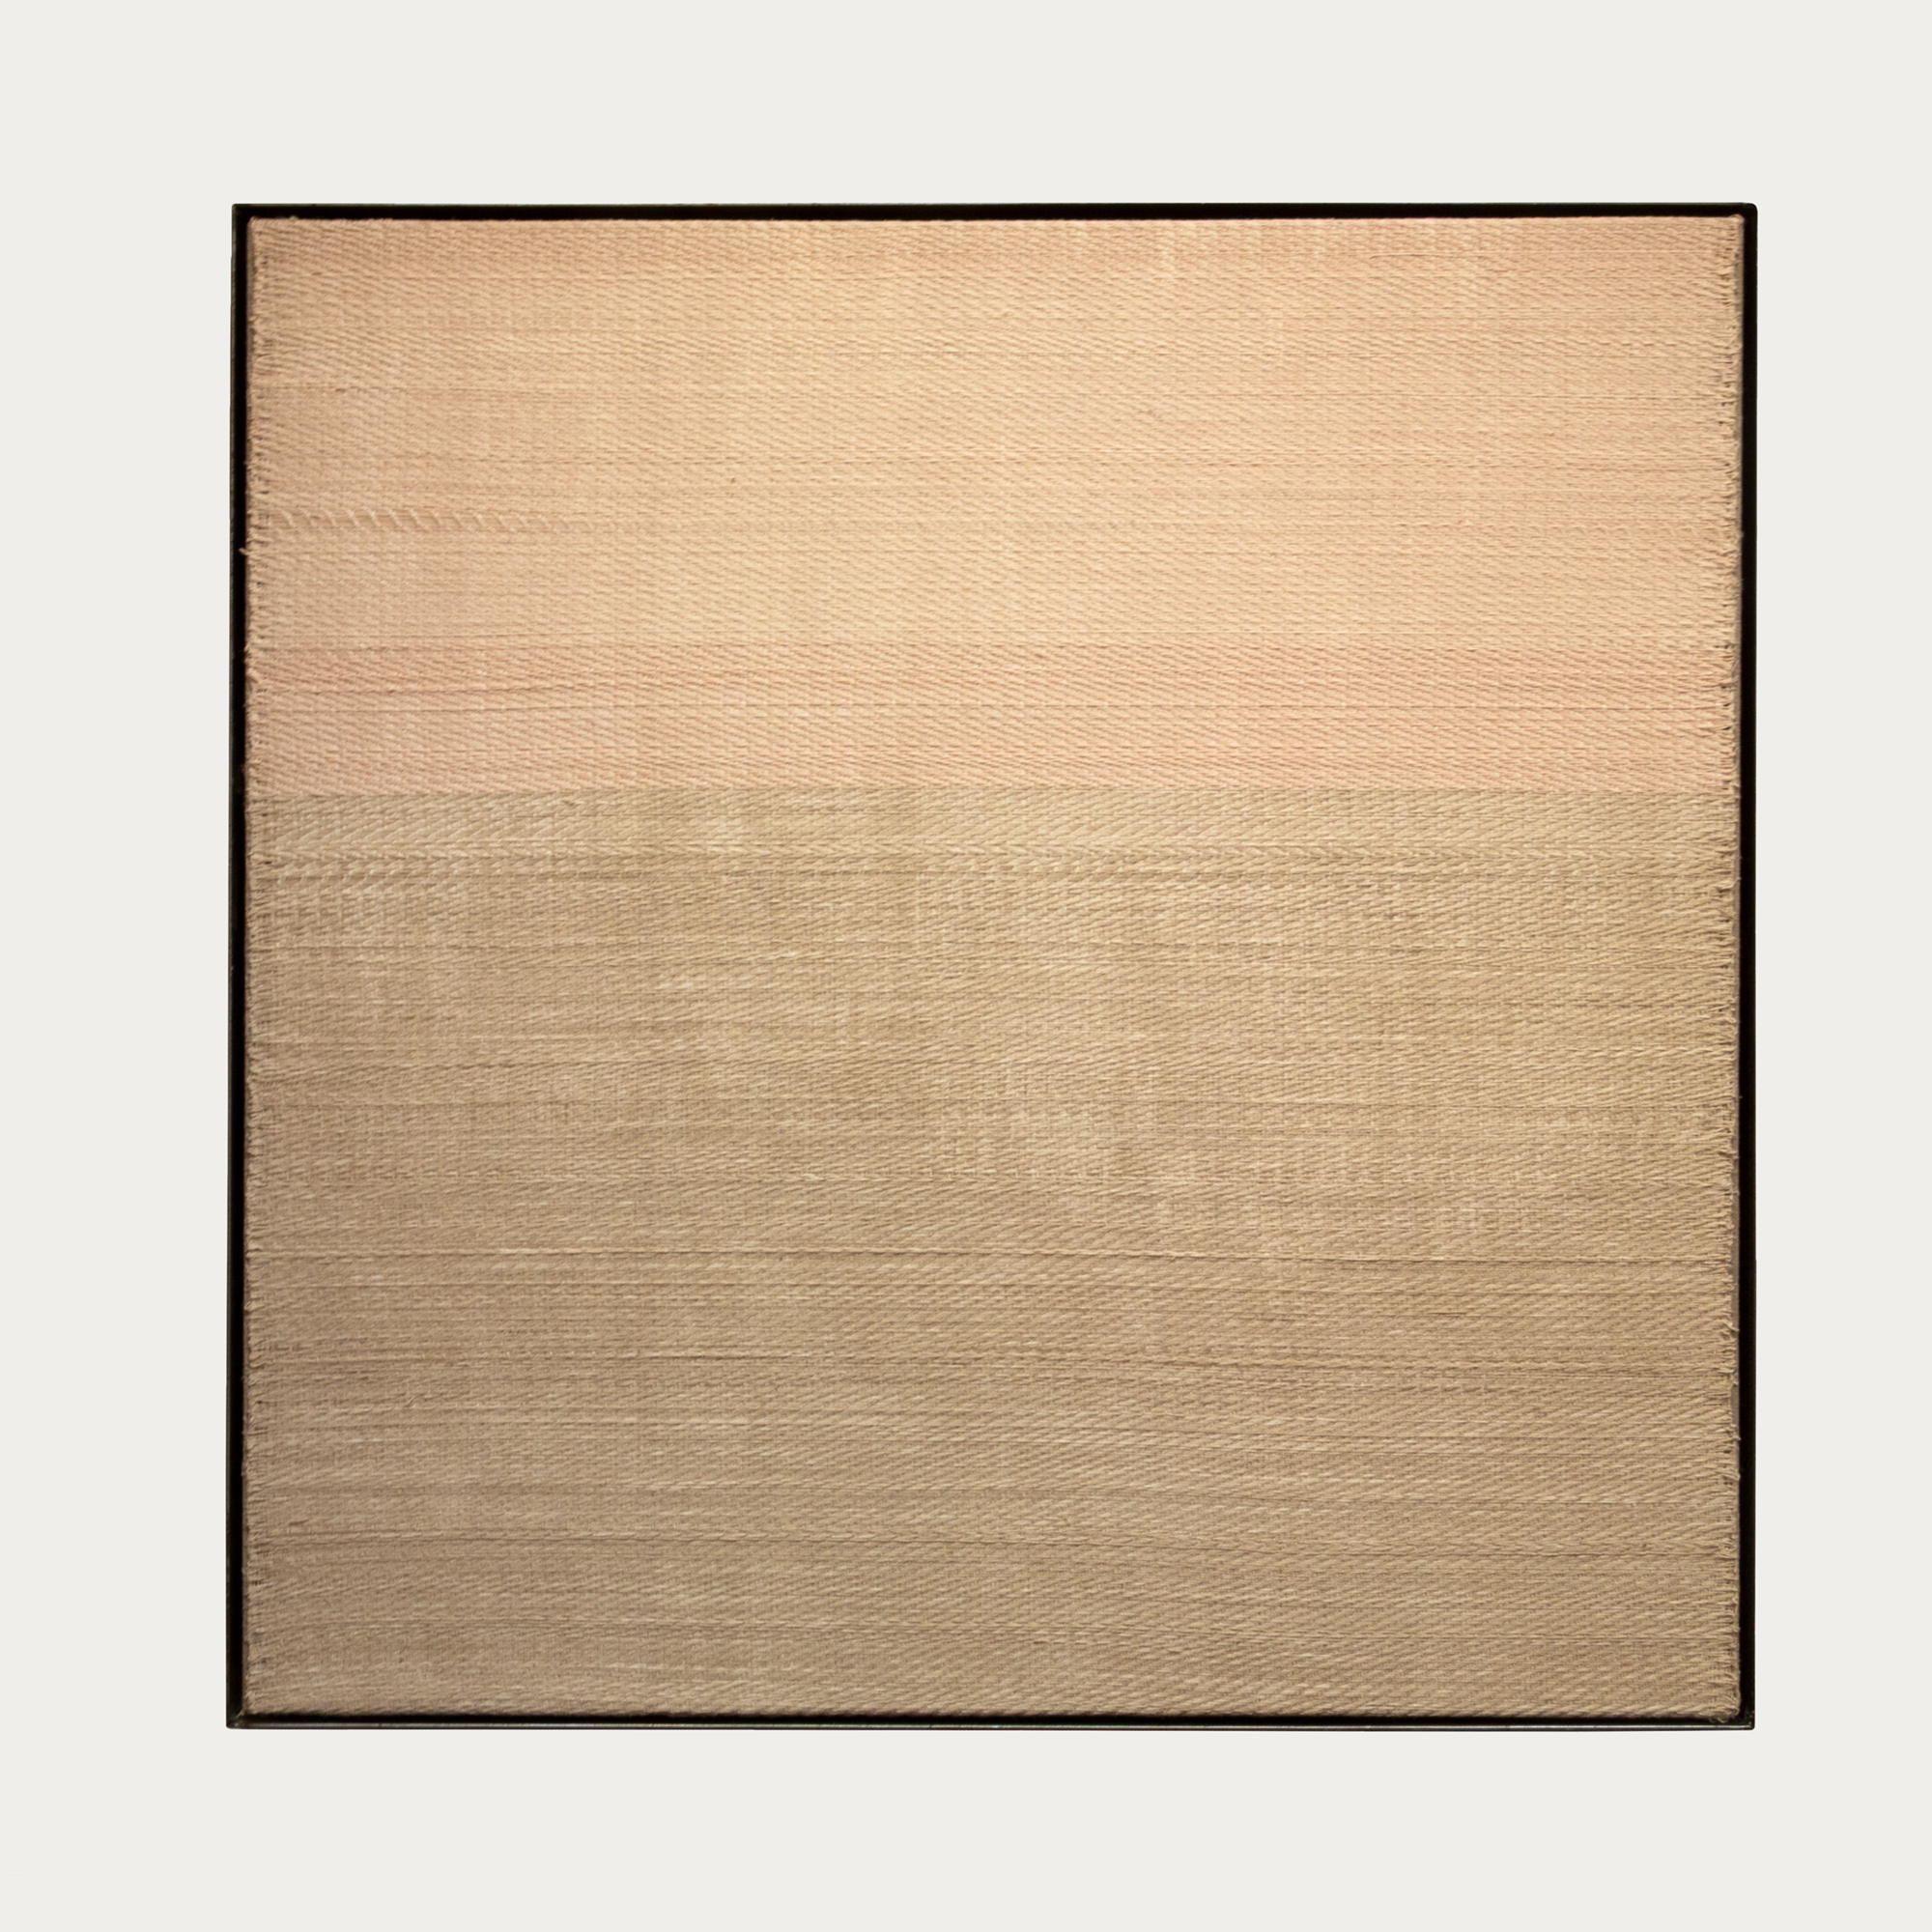 

											Elizabeth Hohimer</b>

											<em>
												Cessation</em> 

											<h4>
												June 26 – August 29, 2020											</h4>

		                																																													<i>Mirage 2,</i>  
																																								2020, 
																																								hand woven West Texas cotton stained with northern New Mexico clay and stretched over linen in steel frame, 
																																								36 3/4 x 36 3/4 x 2 1/2 inches 
																								
		                				